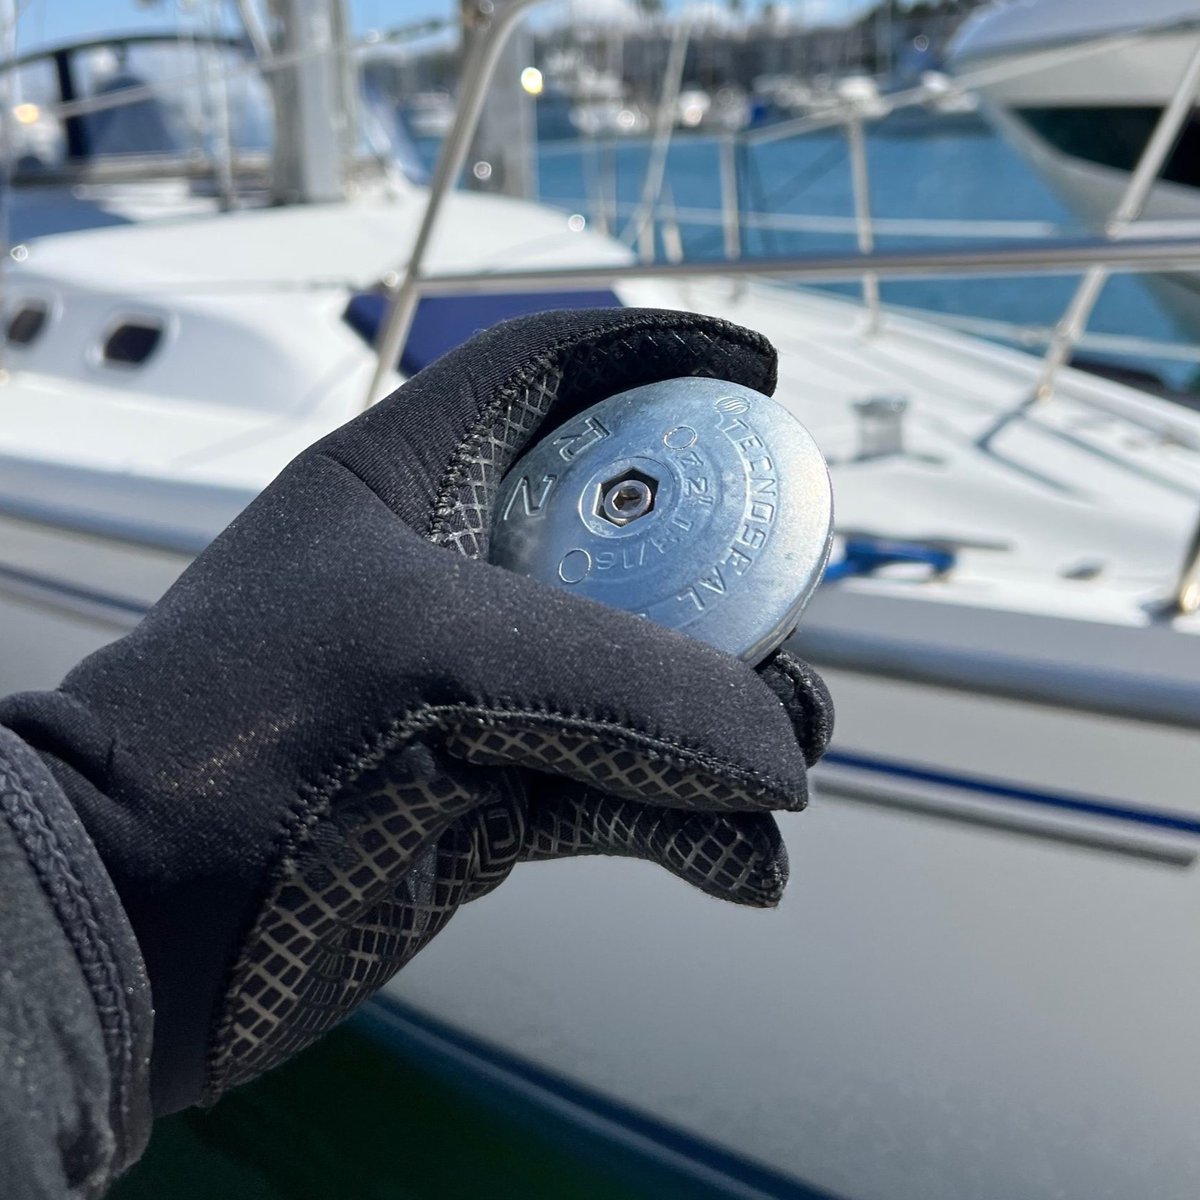 Marina effectively provides underwater hull cleaning services, extending from the waterline to the keel.

We also give inspection & replacement on worn/missing zincs as needed.

#MarinaDiving #HullCleaning #HullCare #RedondoBeach
#BoaterProblems #BoatingLife #BoatMaintenance #USA